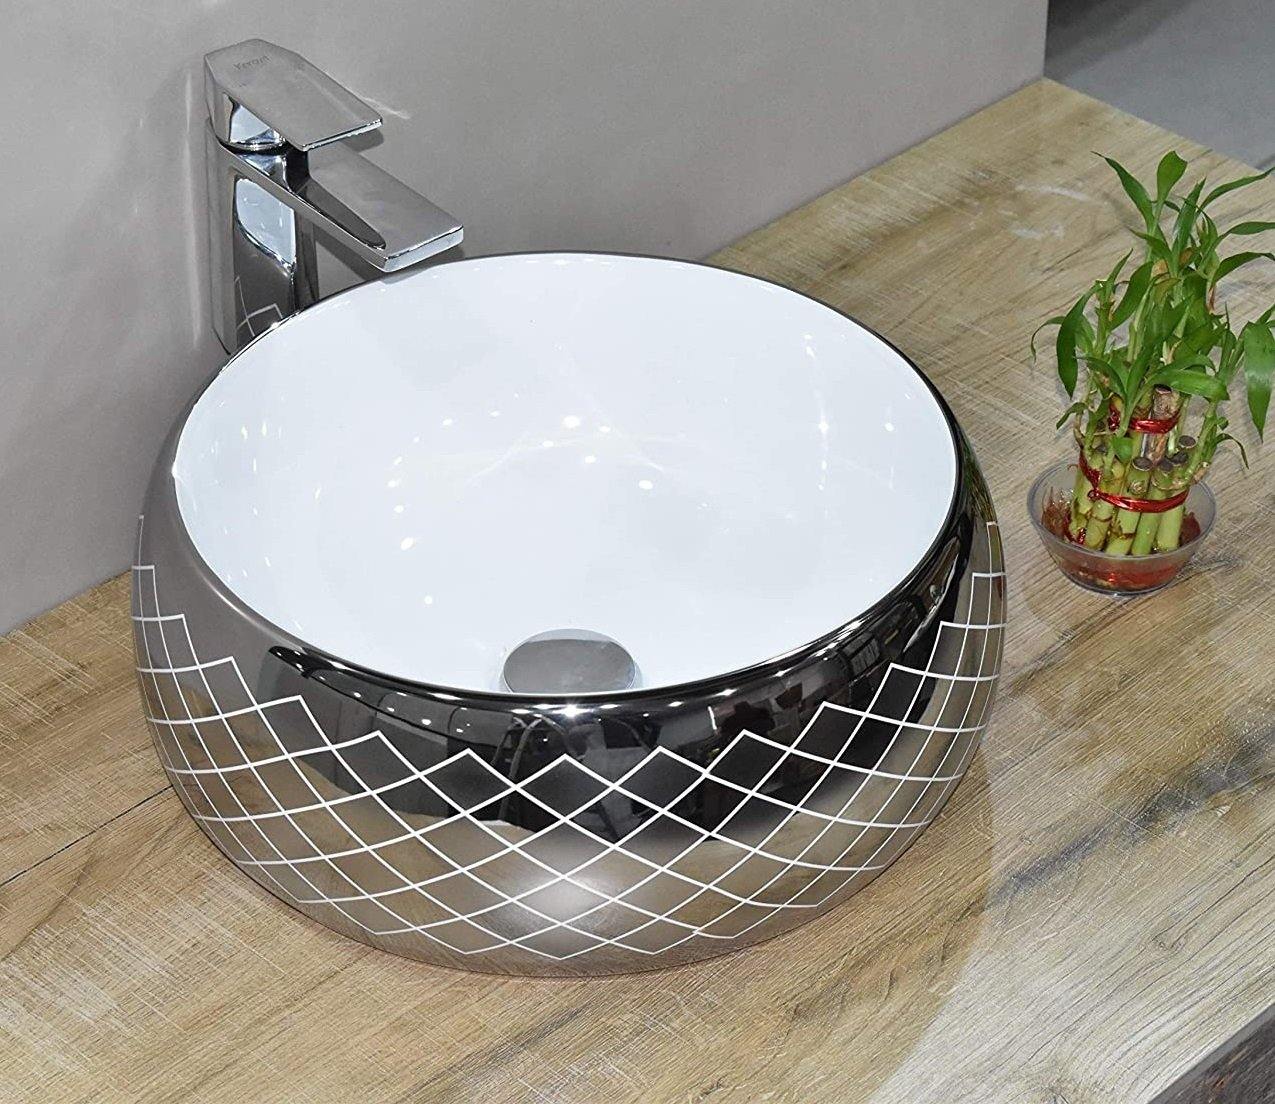 Ceramic Premium Desisgner Table Top Over Counter Vessel Sink Wash Basin for Bathroom 16 X 16 X 6 Inches Silver White Basin For Bathroom - Bath Outlet